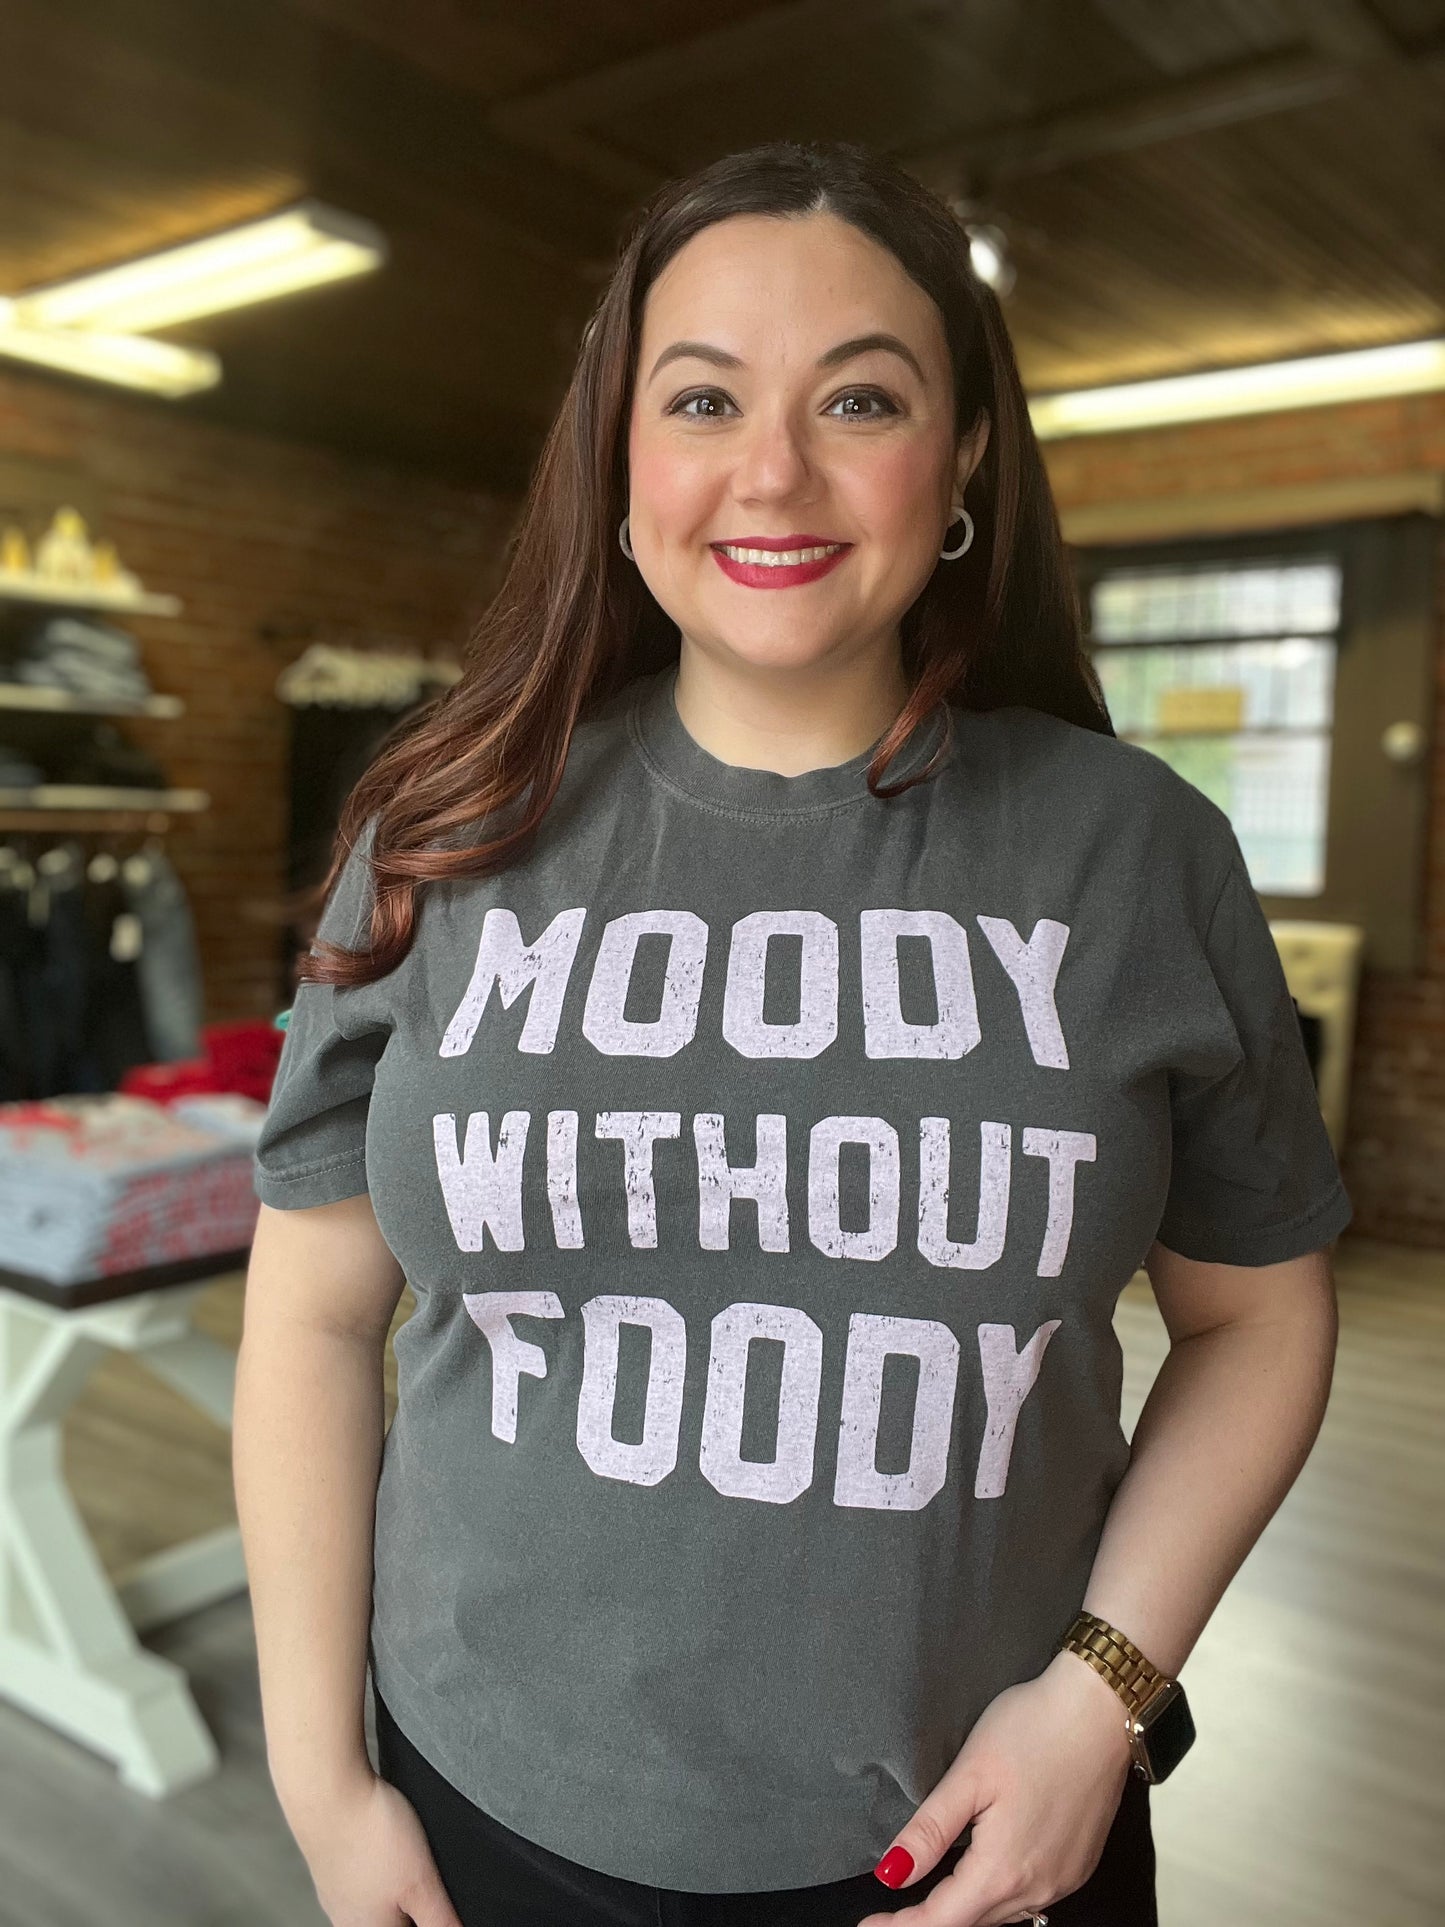 “Moody without Foody” tee